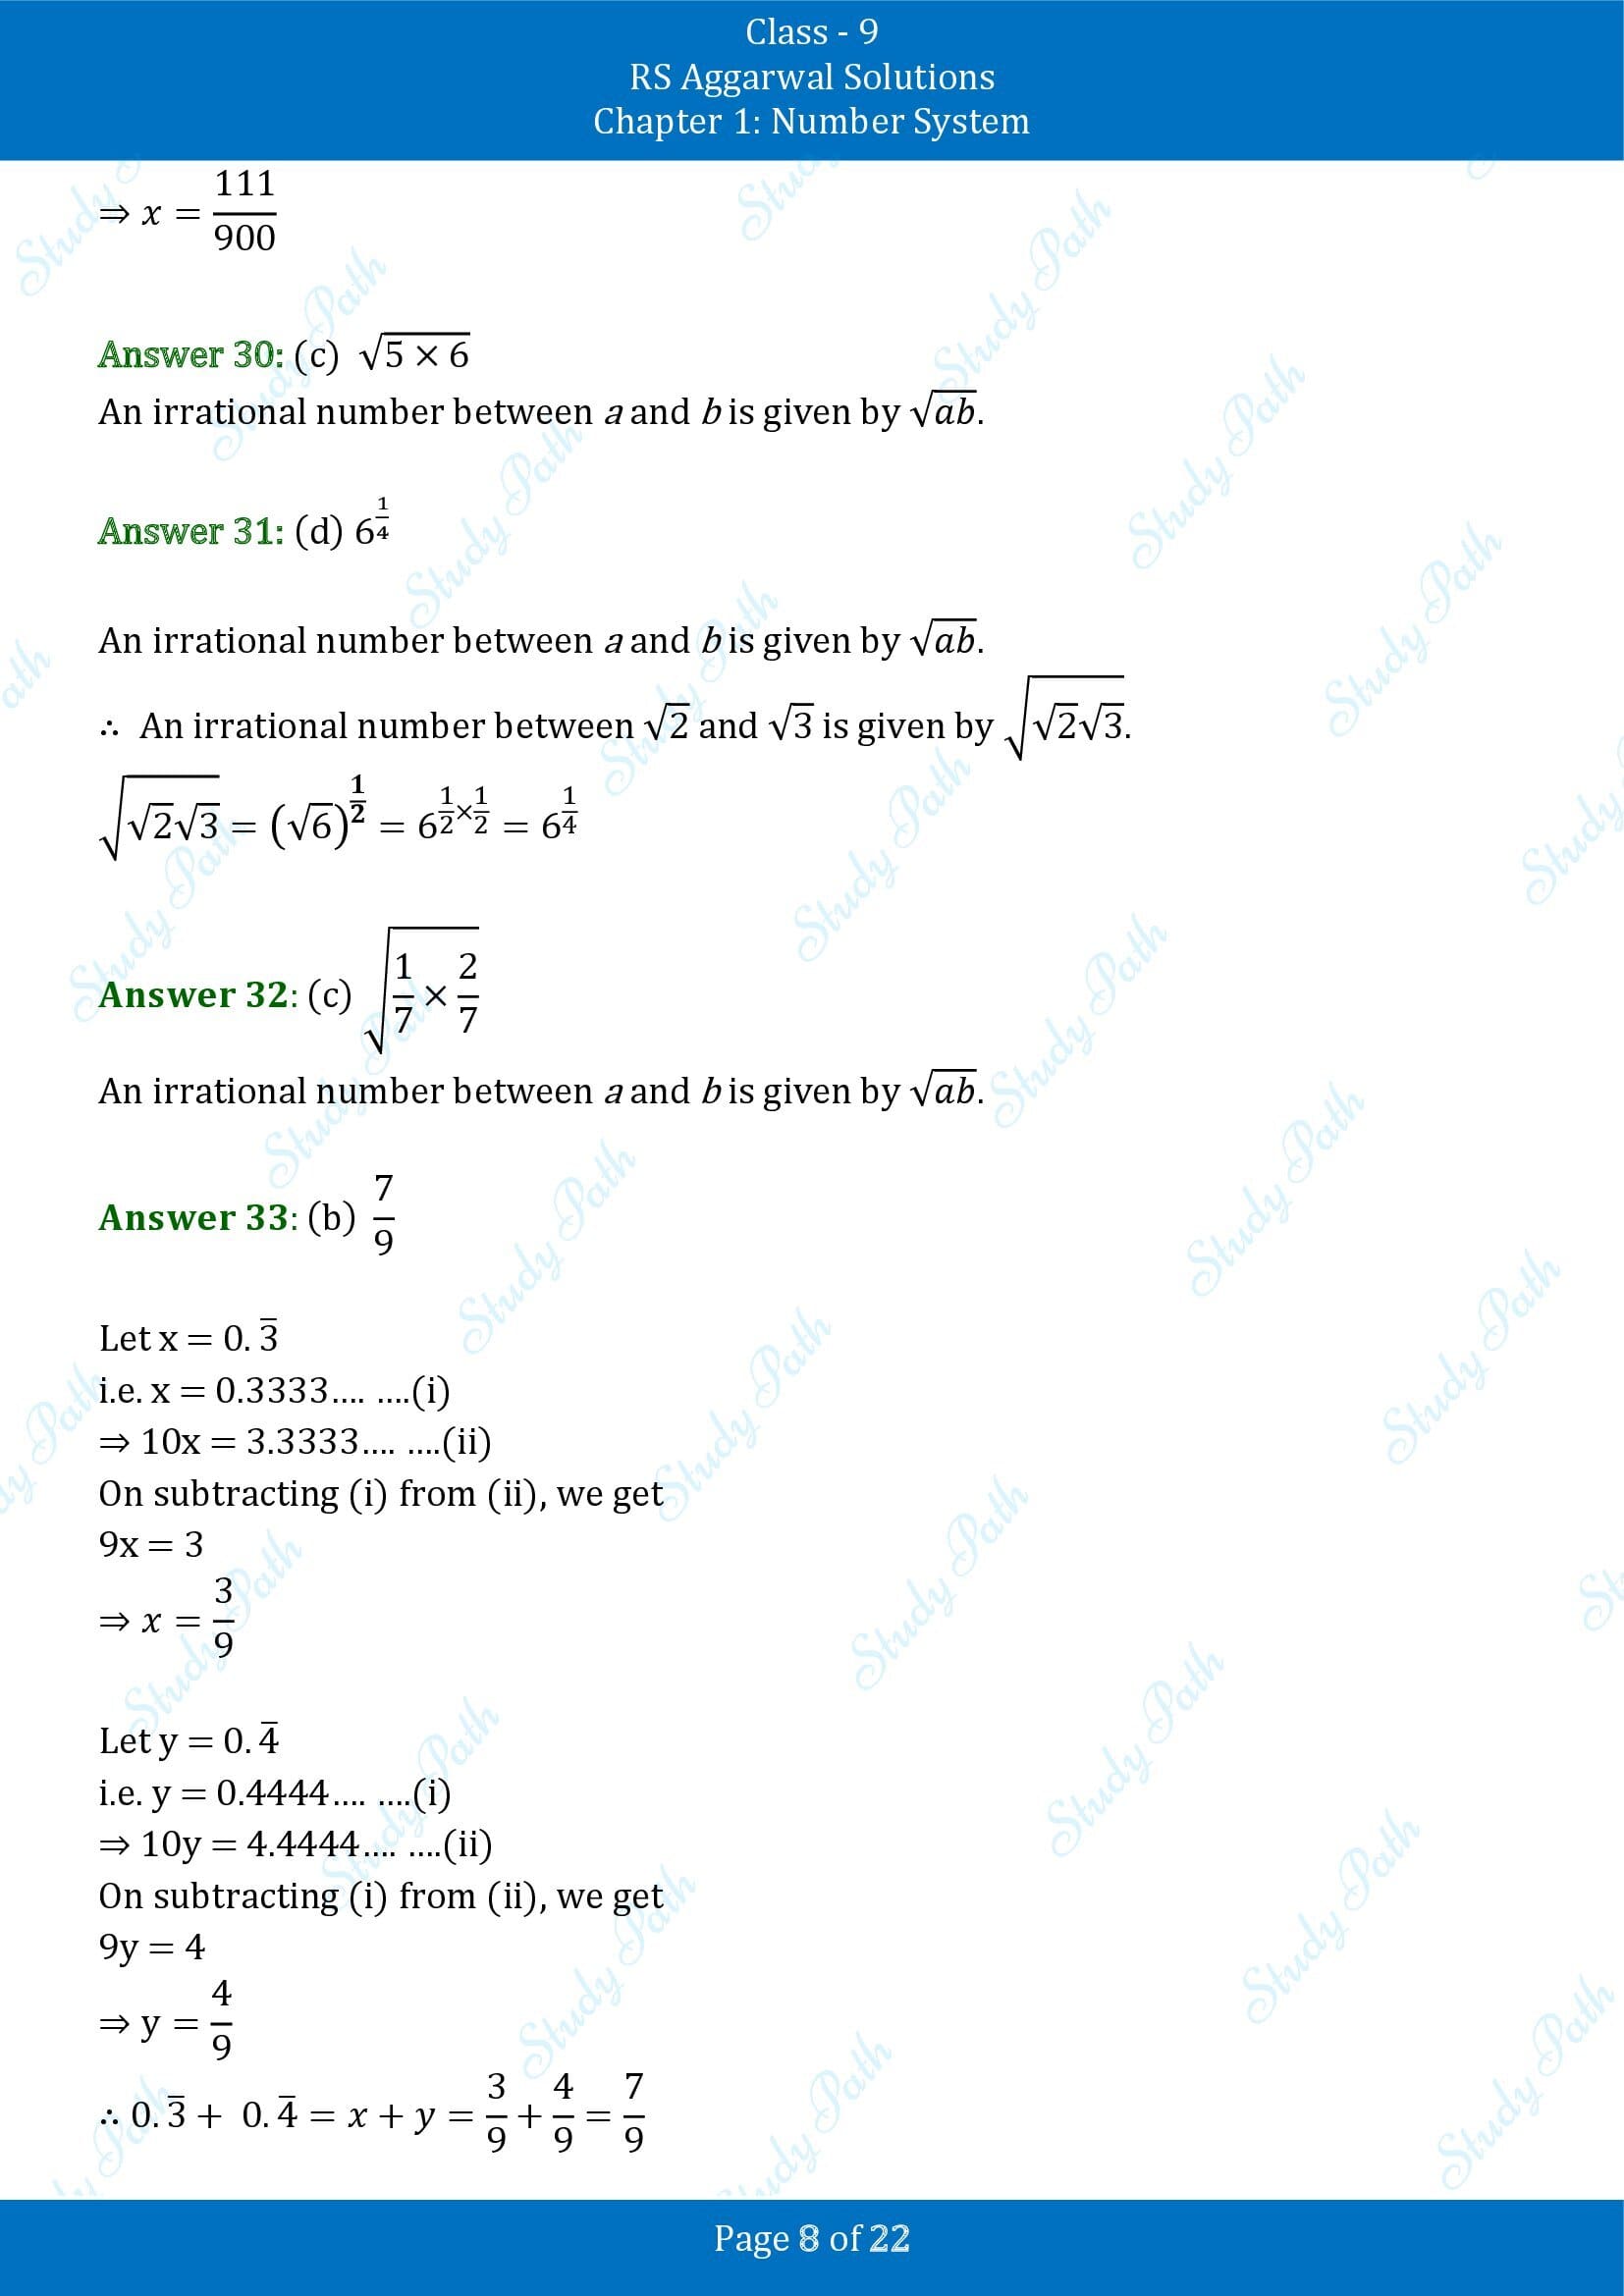 RS Aggarwal Solutions Class 9 Chapter 1 Number System Multiple Choice Questions MCQs 00008